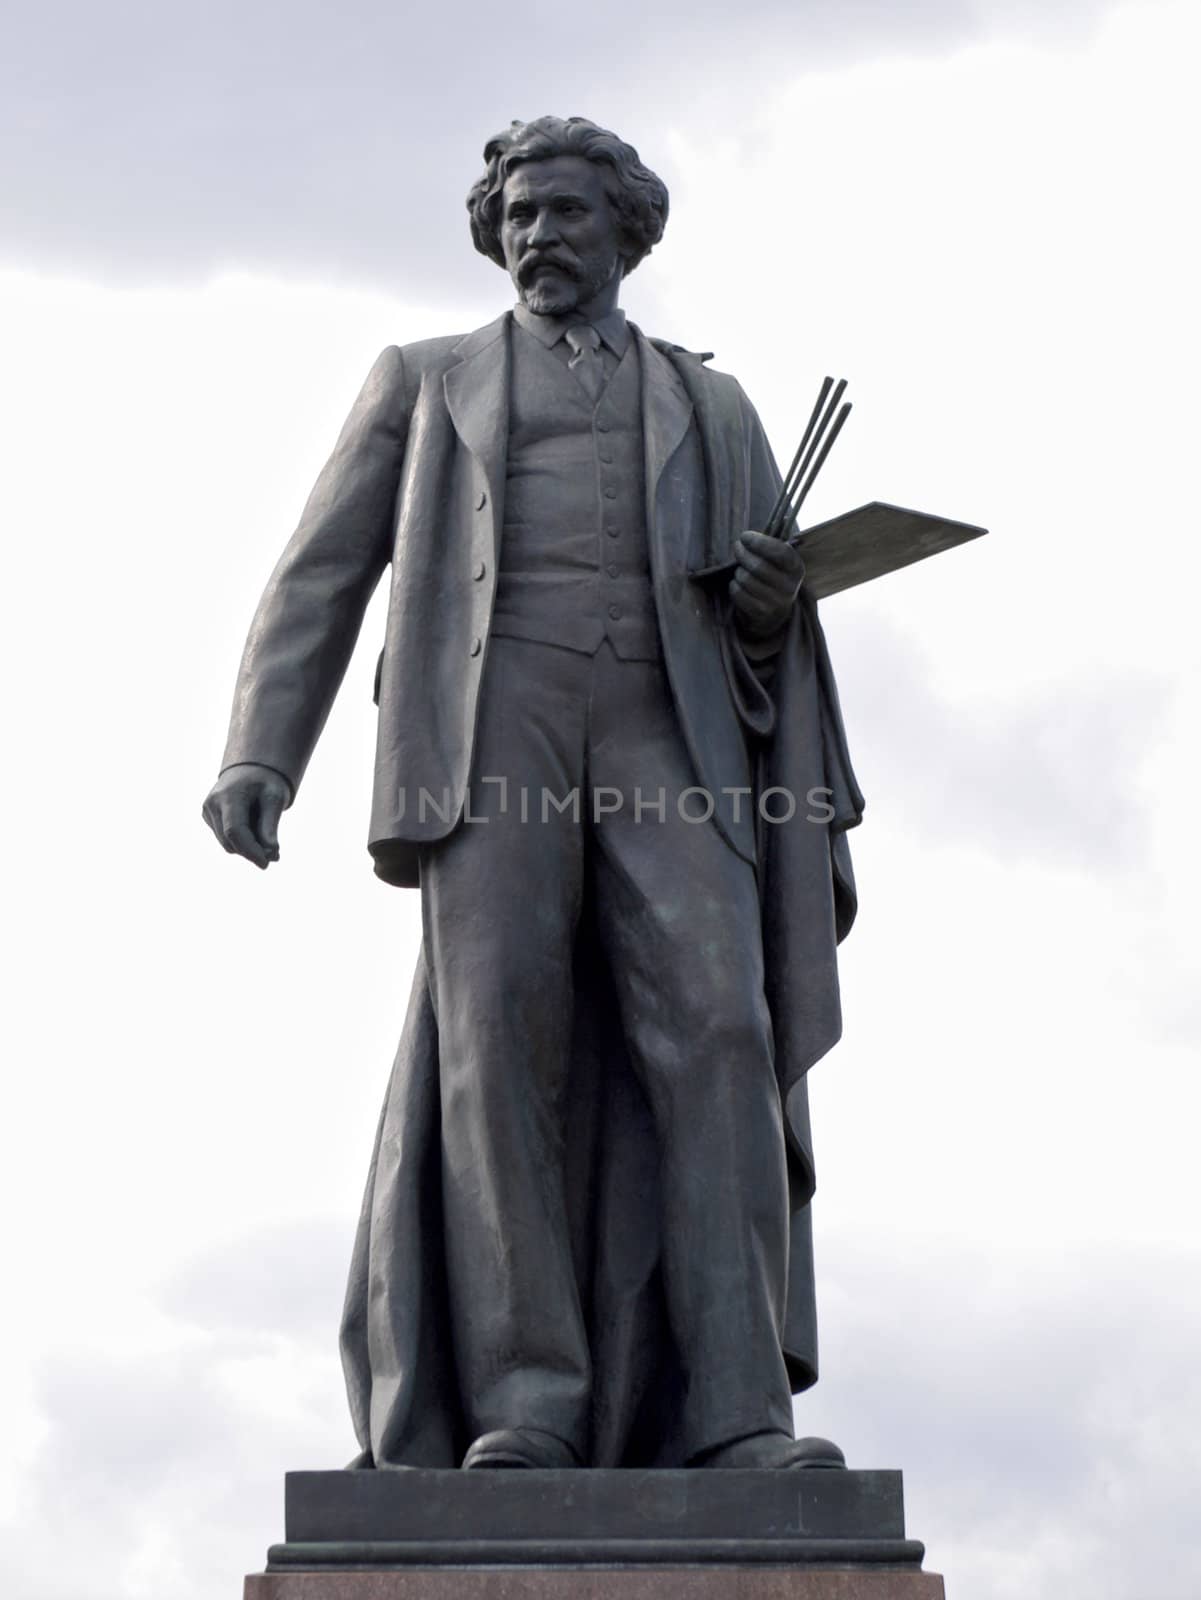 Monument of Artist Repin in Bolotnaya square, Moscow, Russia